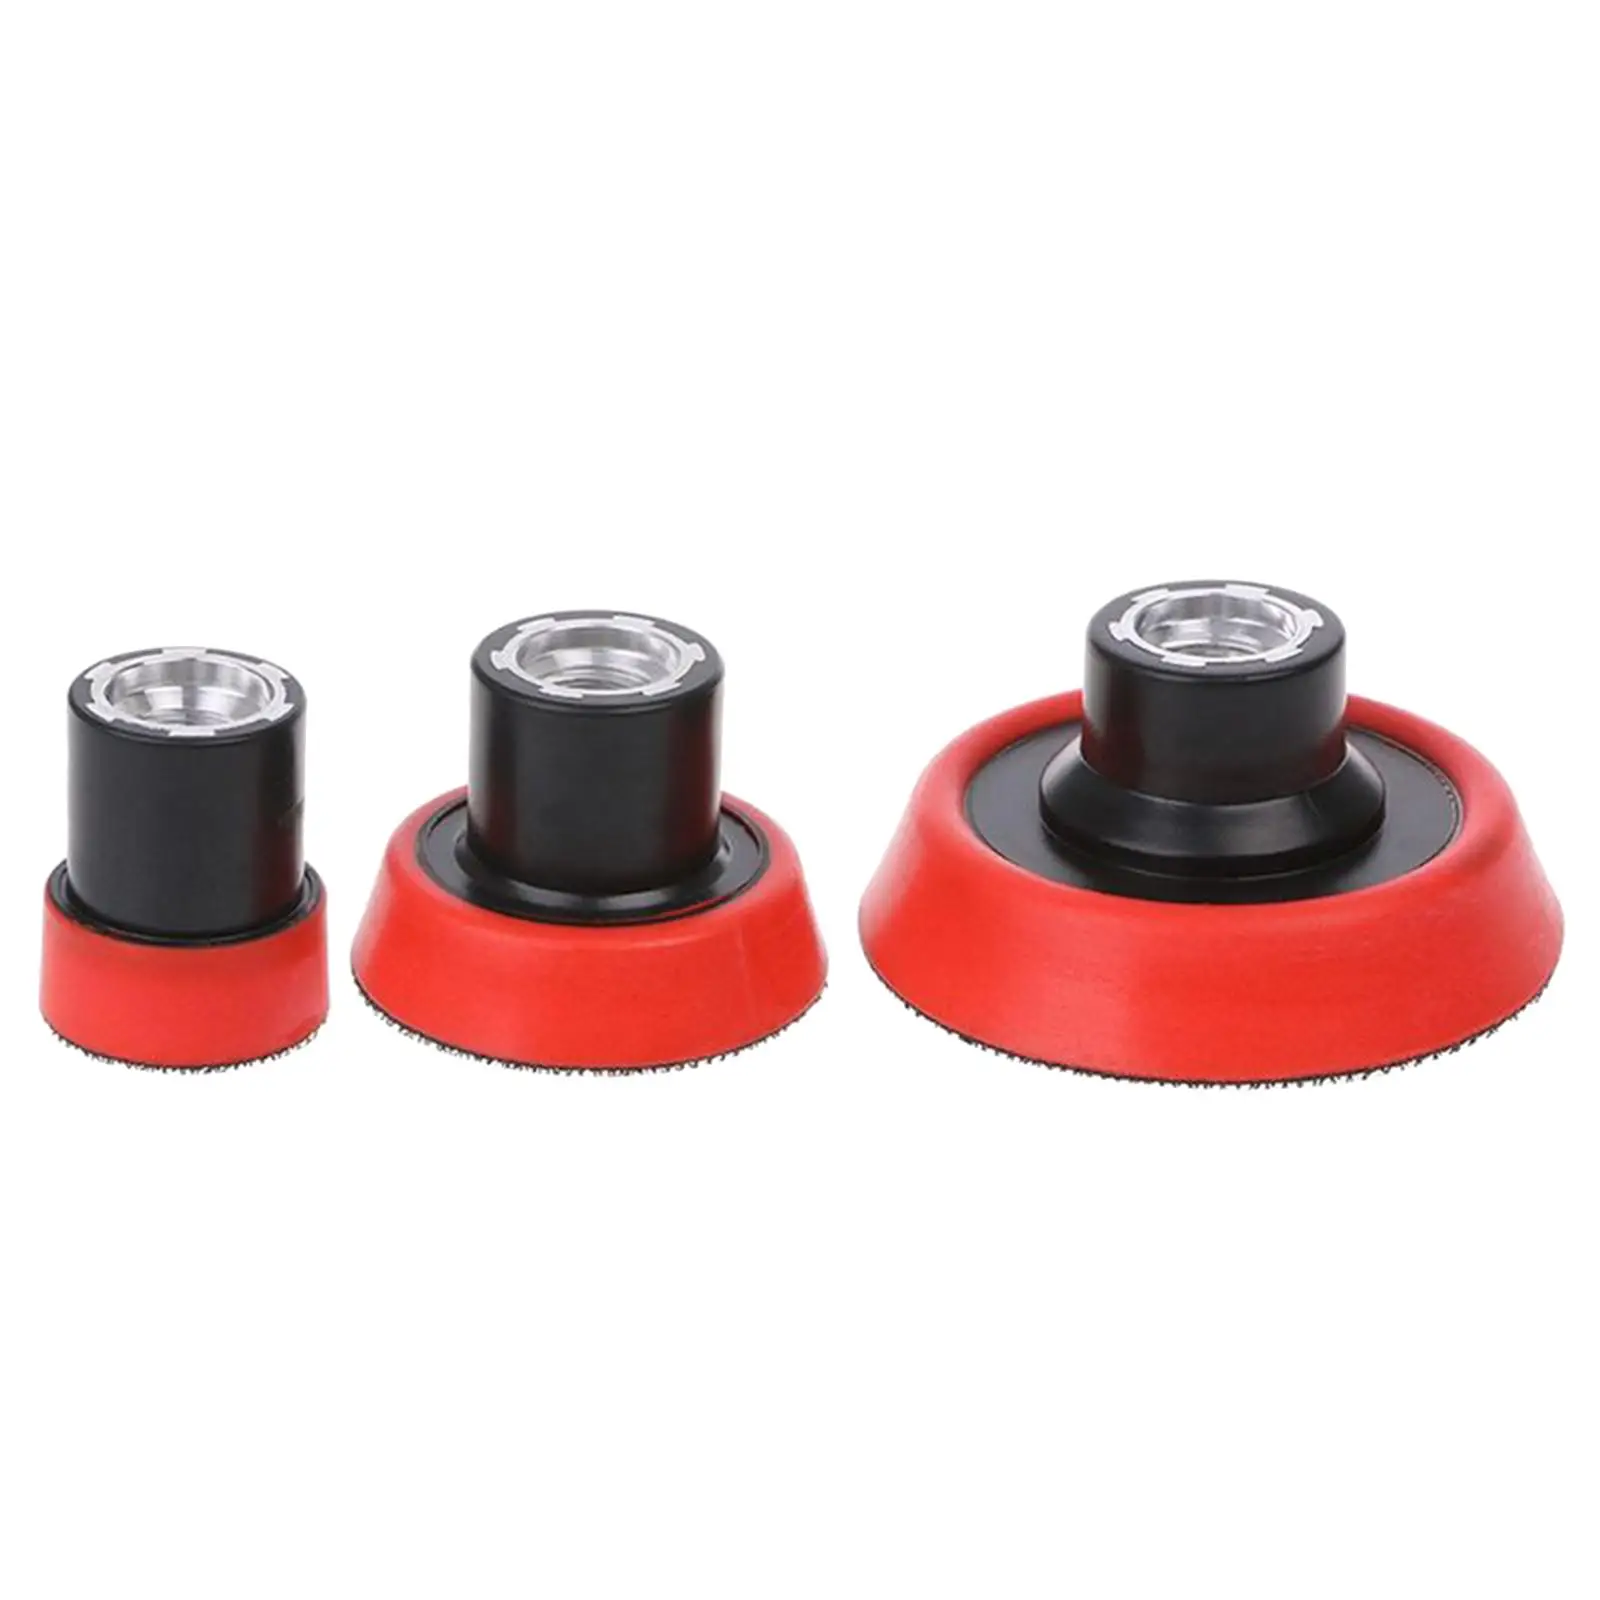 

3x M10 Polisher Tools Backer Parts Durable Set Buffering Backing Plate Buffing Plate Rotary for Polishing Detailing